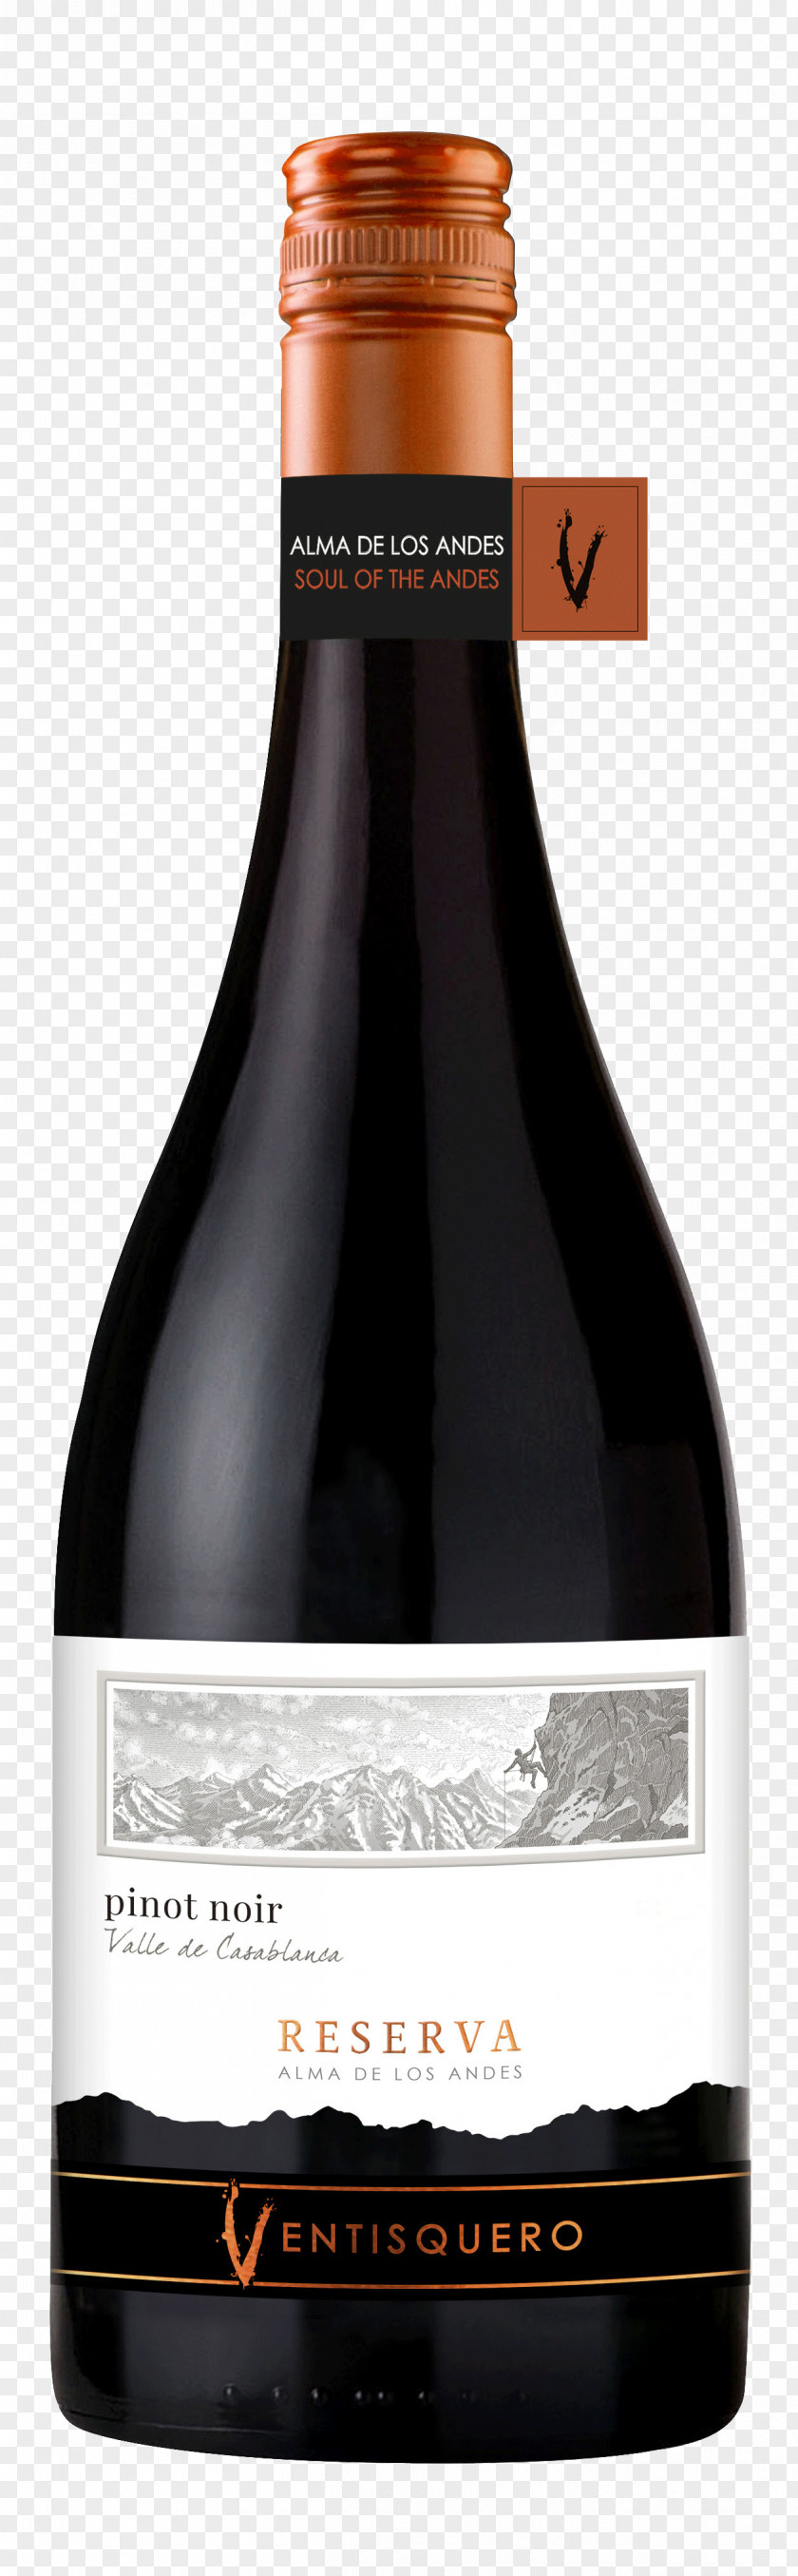 Spanish Red Wine Pinot Noir Liqueur Champagne PNG